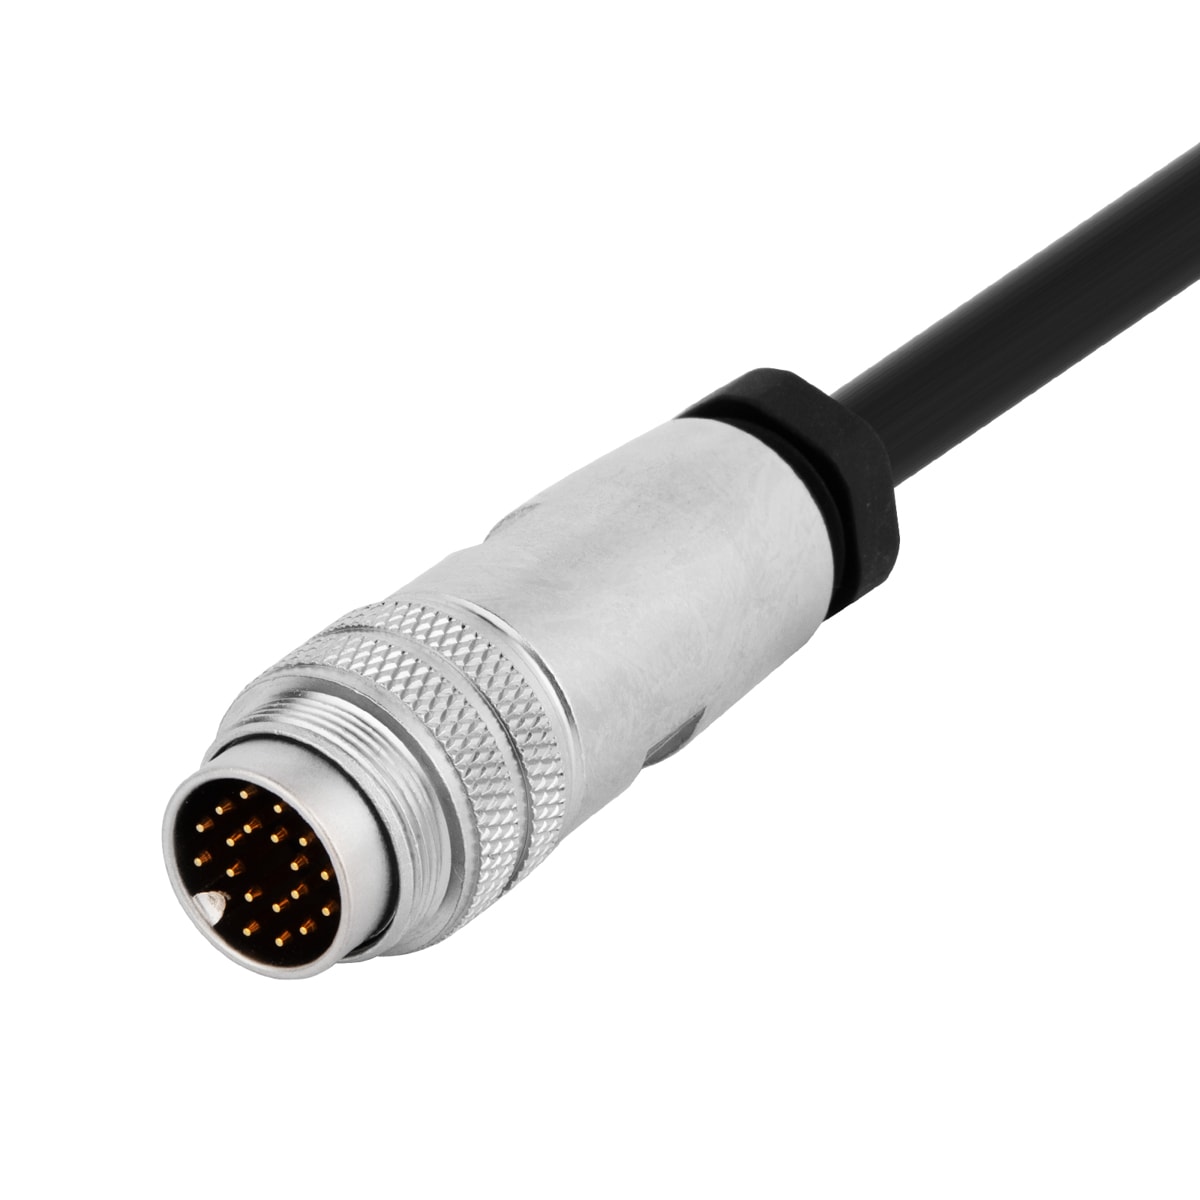 M16 cable connector, male, contacts:12,field assembly type, solder connection, straight, IP67, UL certified